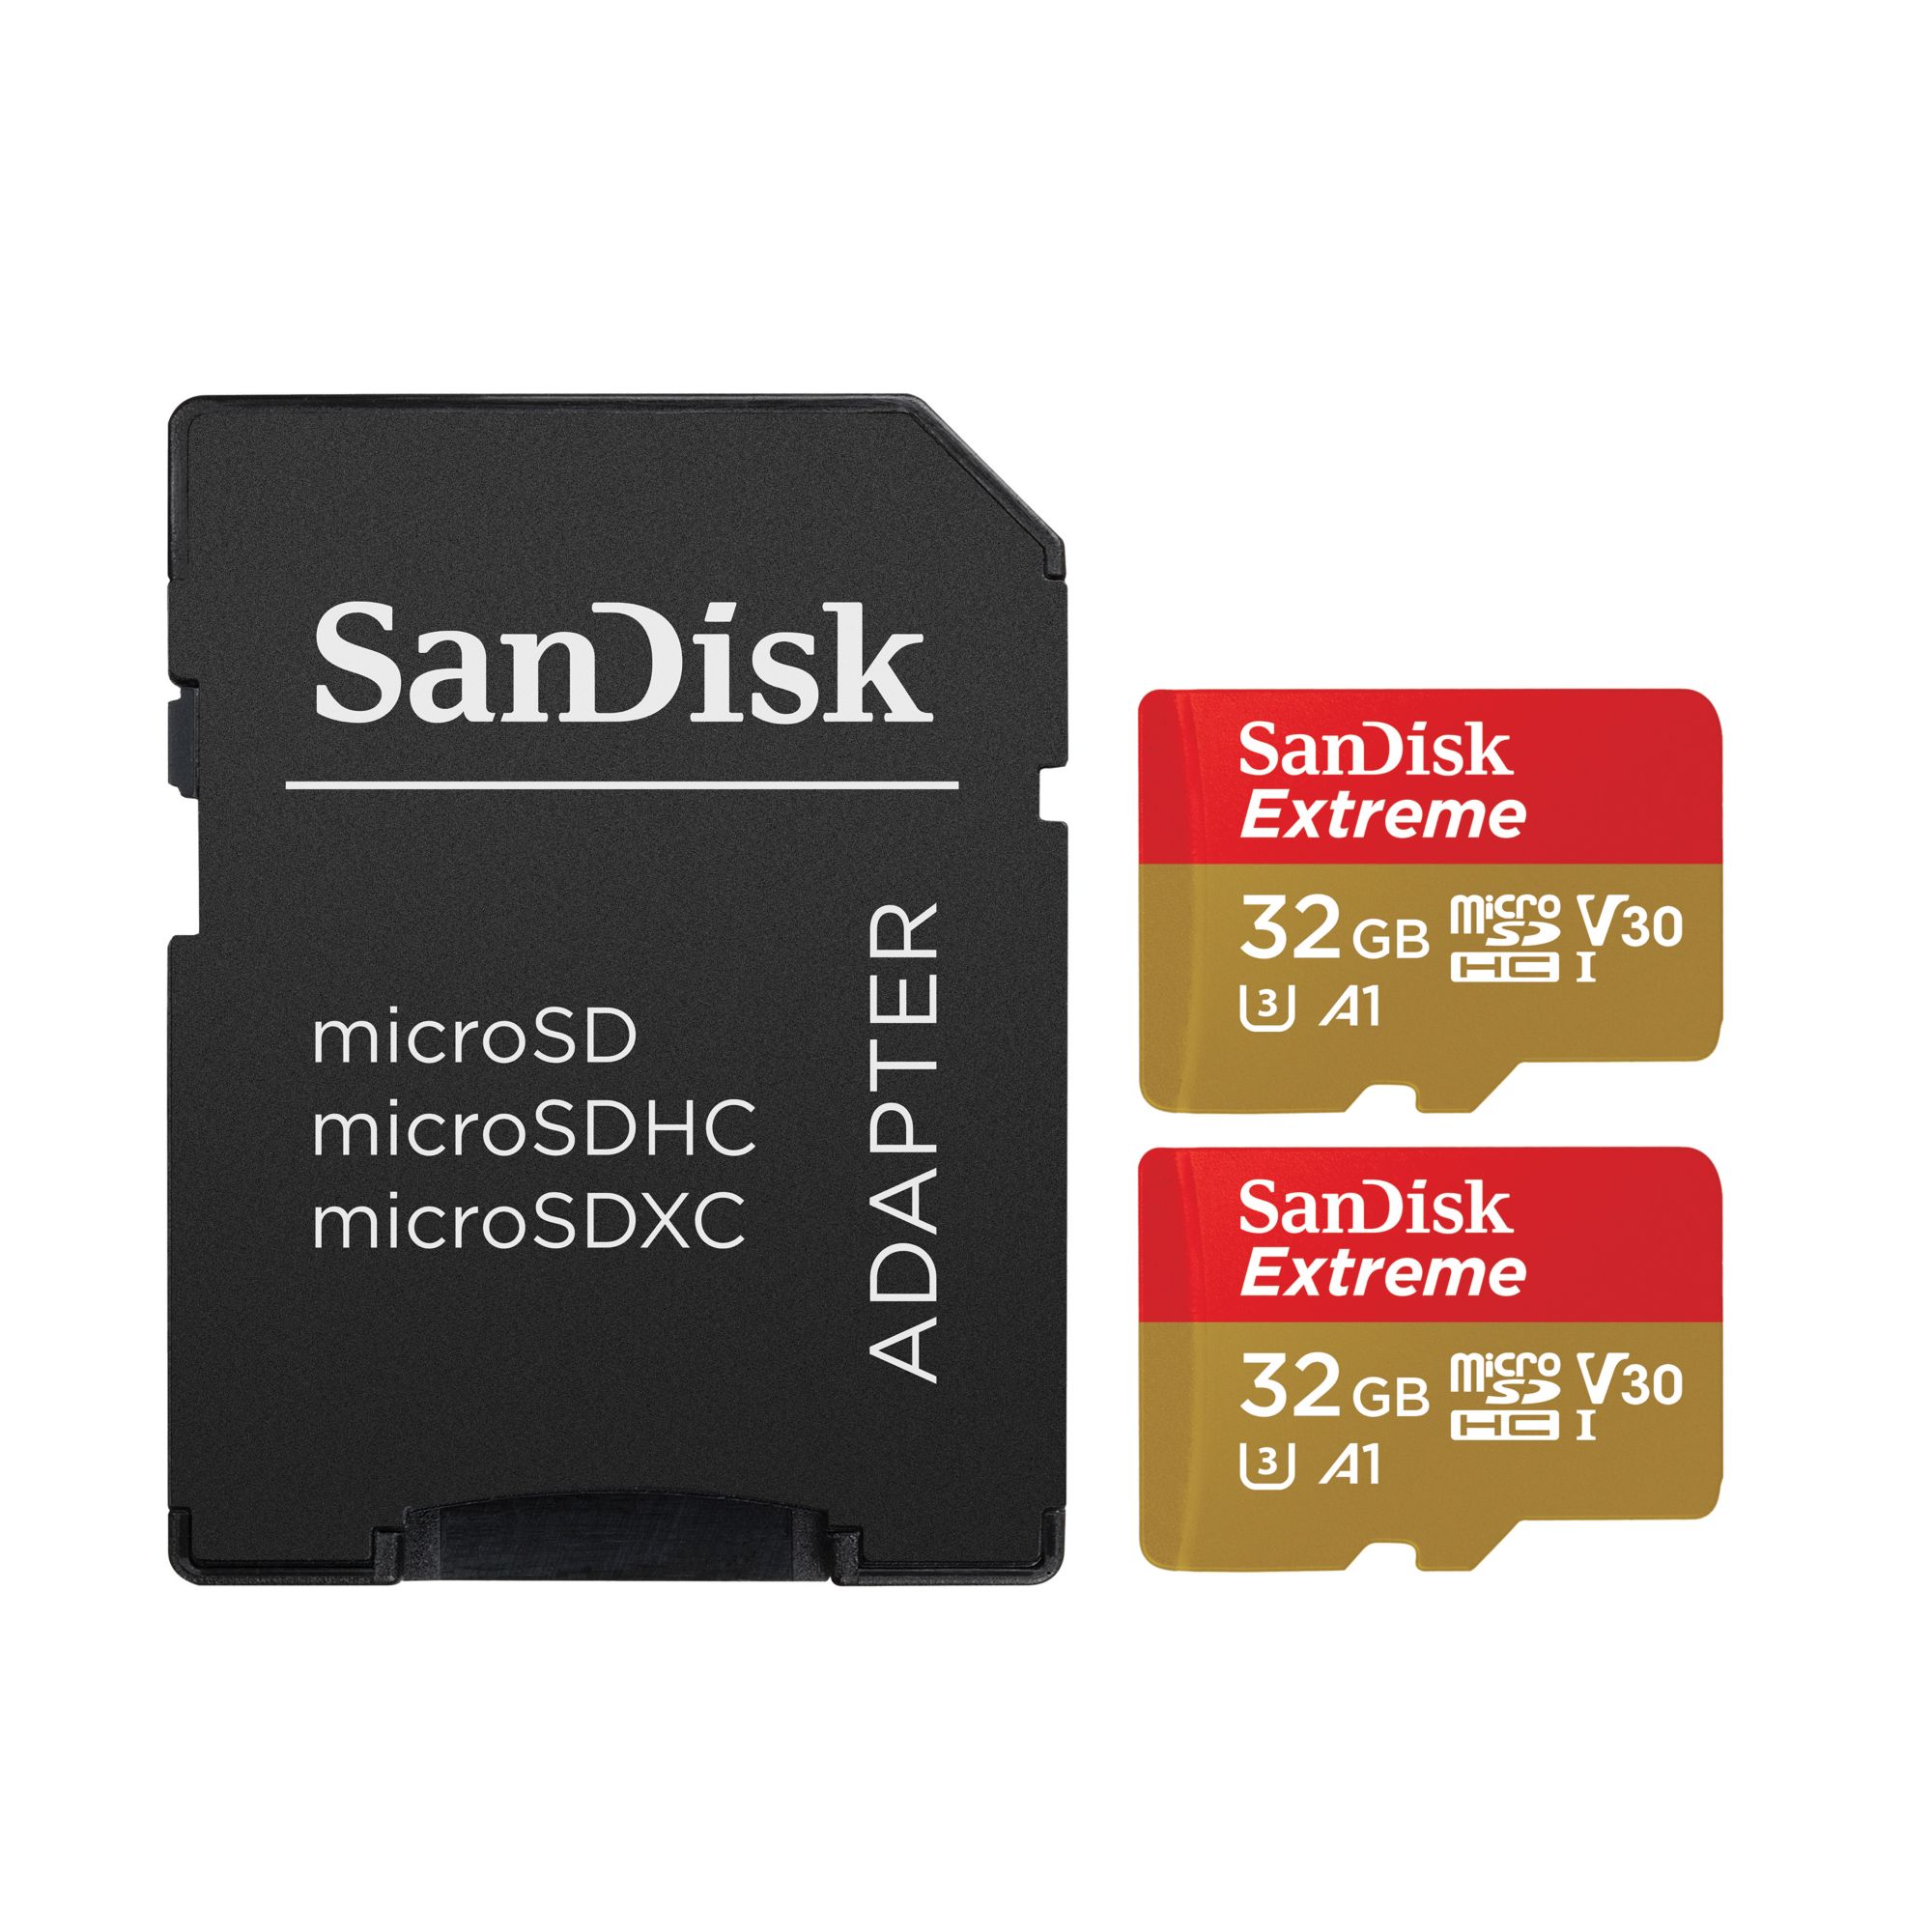 Topnotch Sandisk 32gb At Exclusive Discounts 